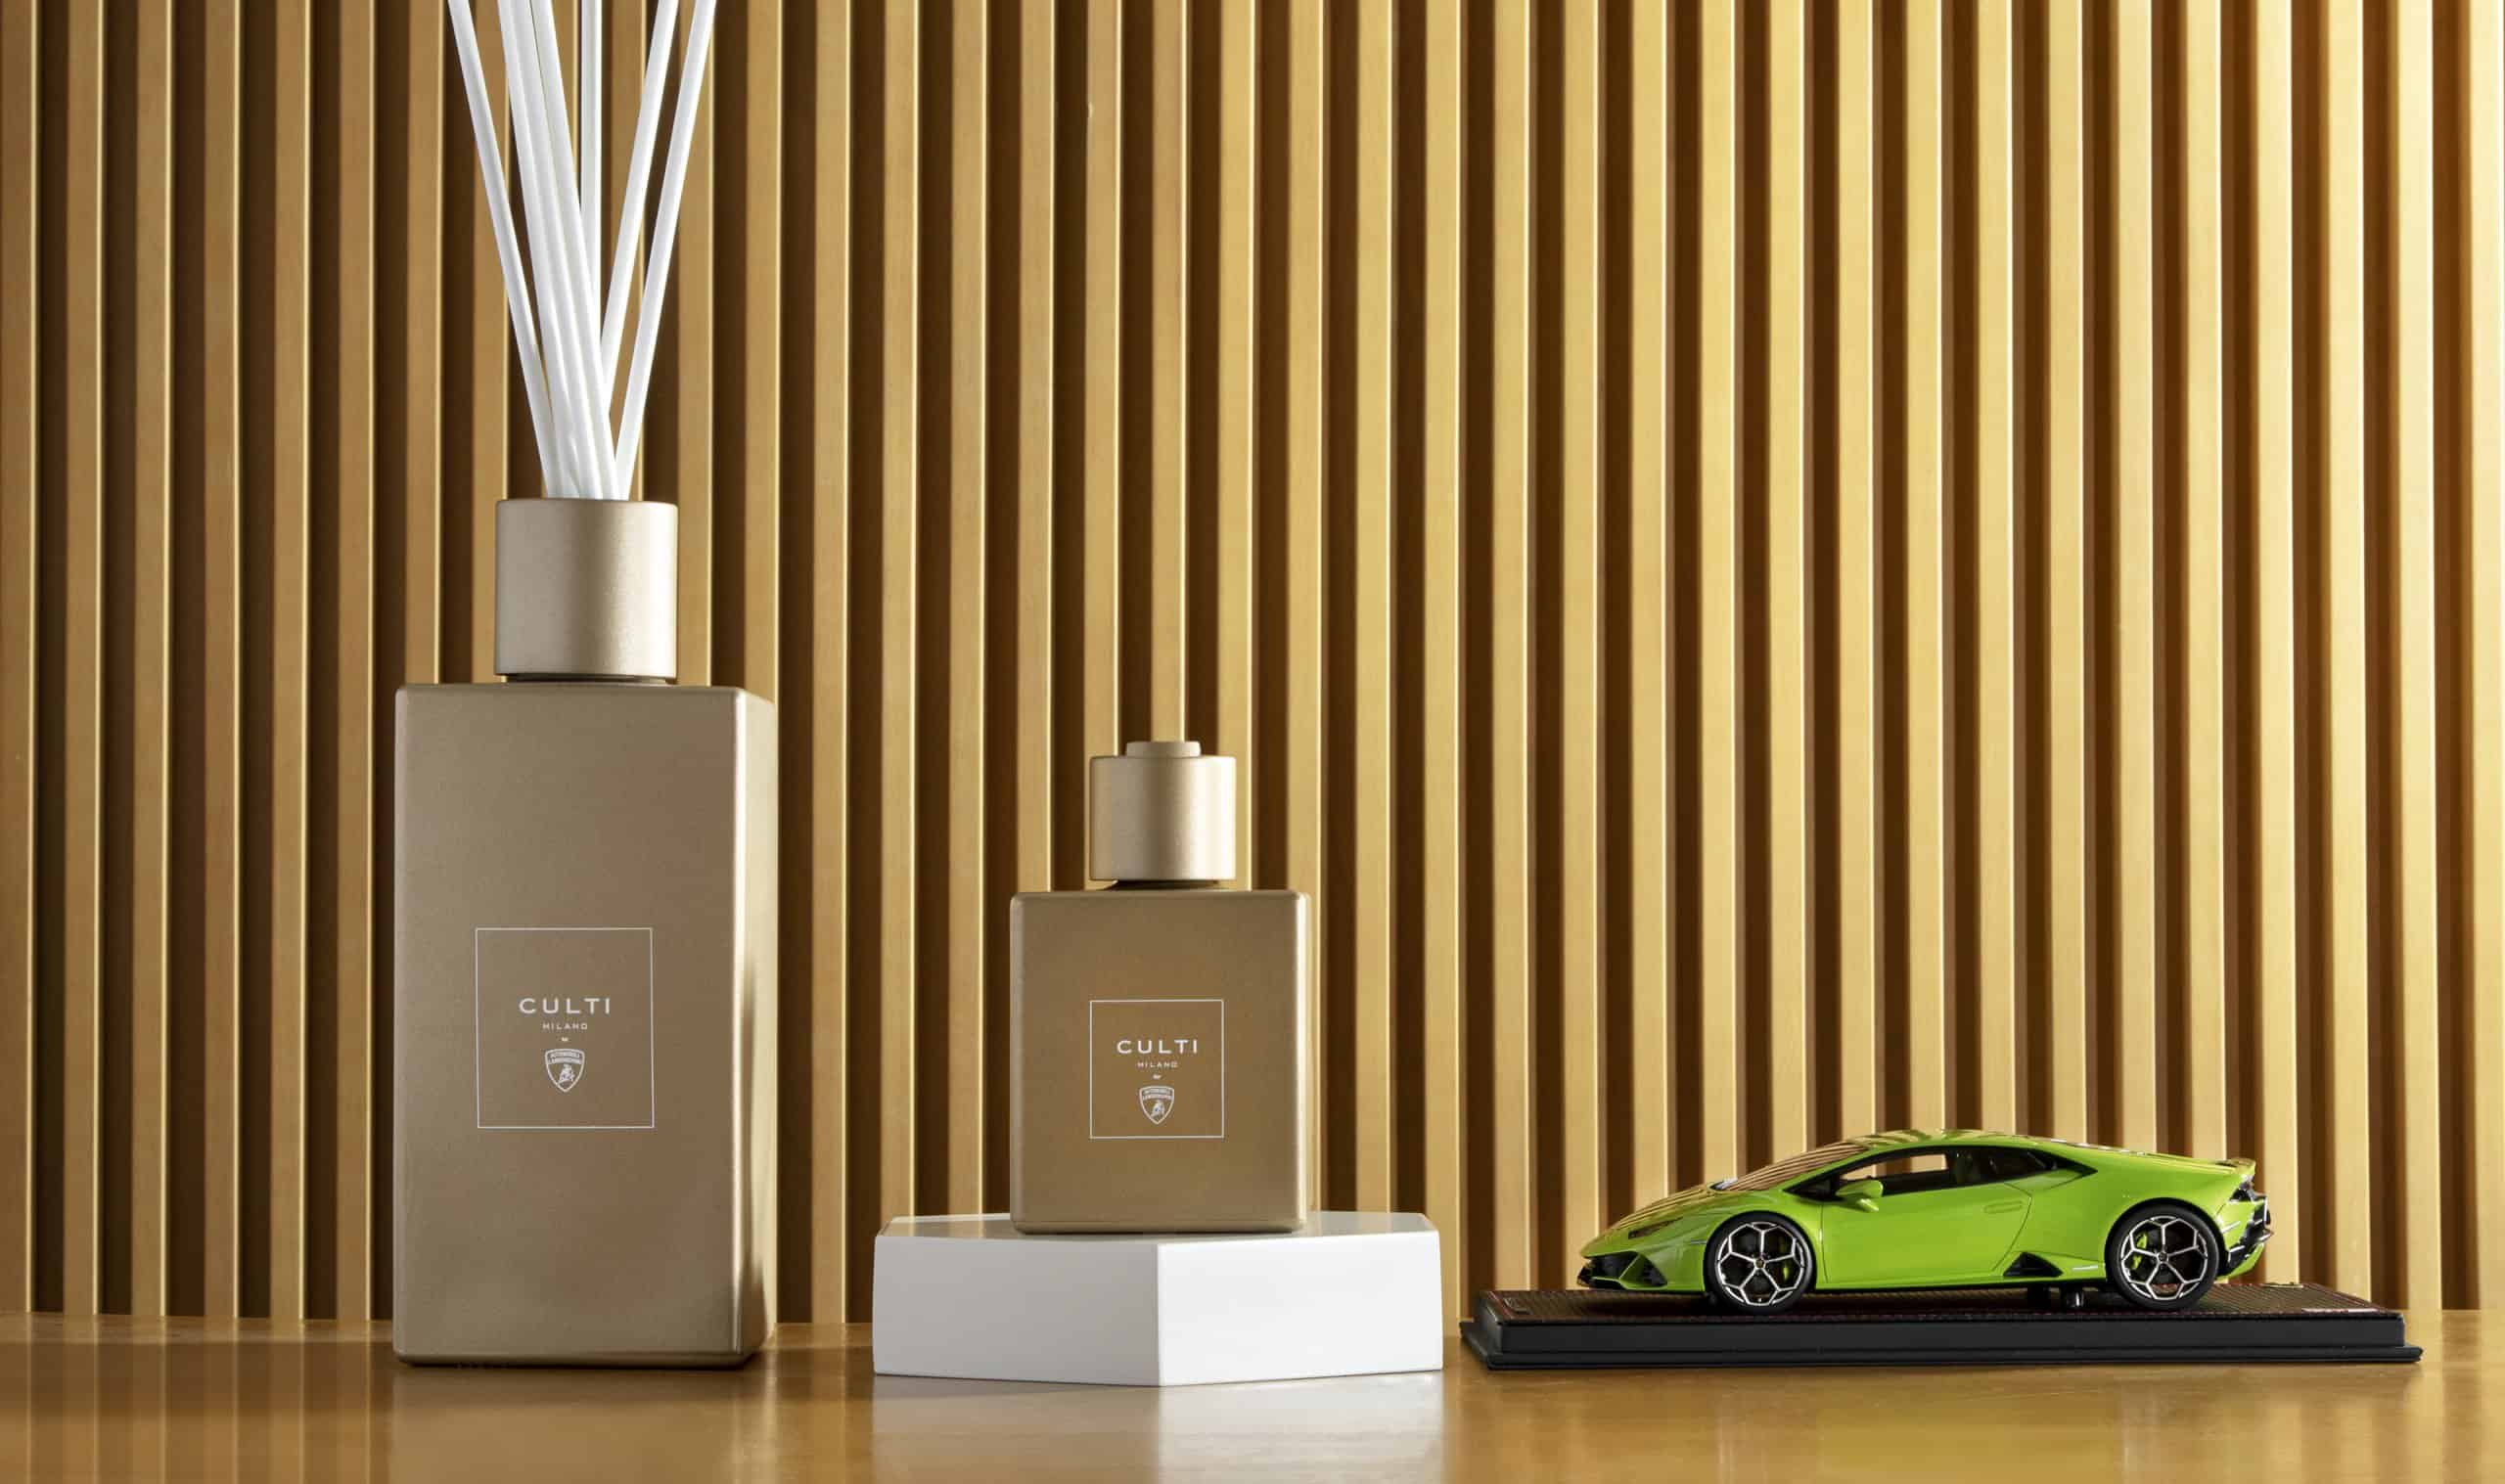 With a partner, Lamborghini launches its own line of fragrance